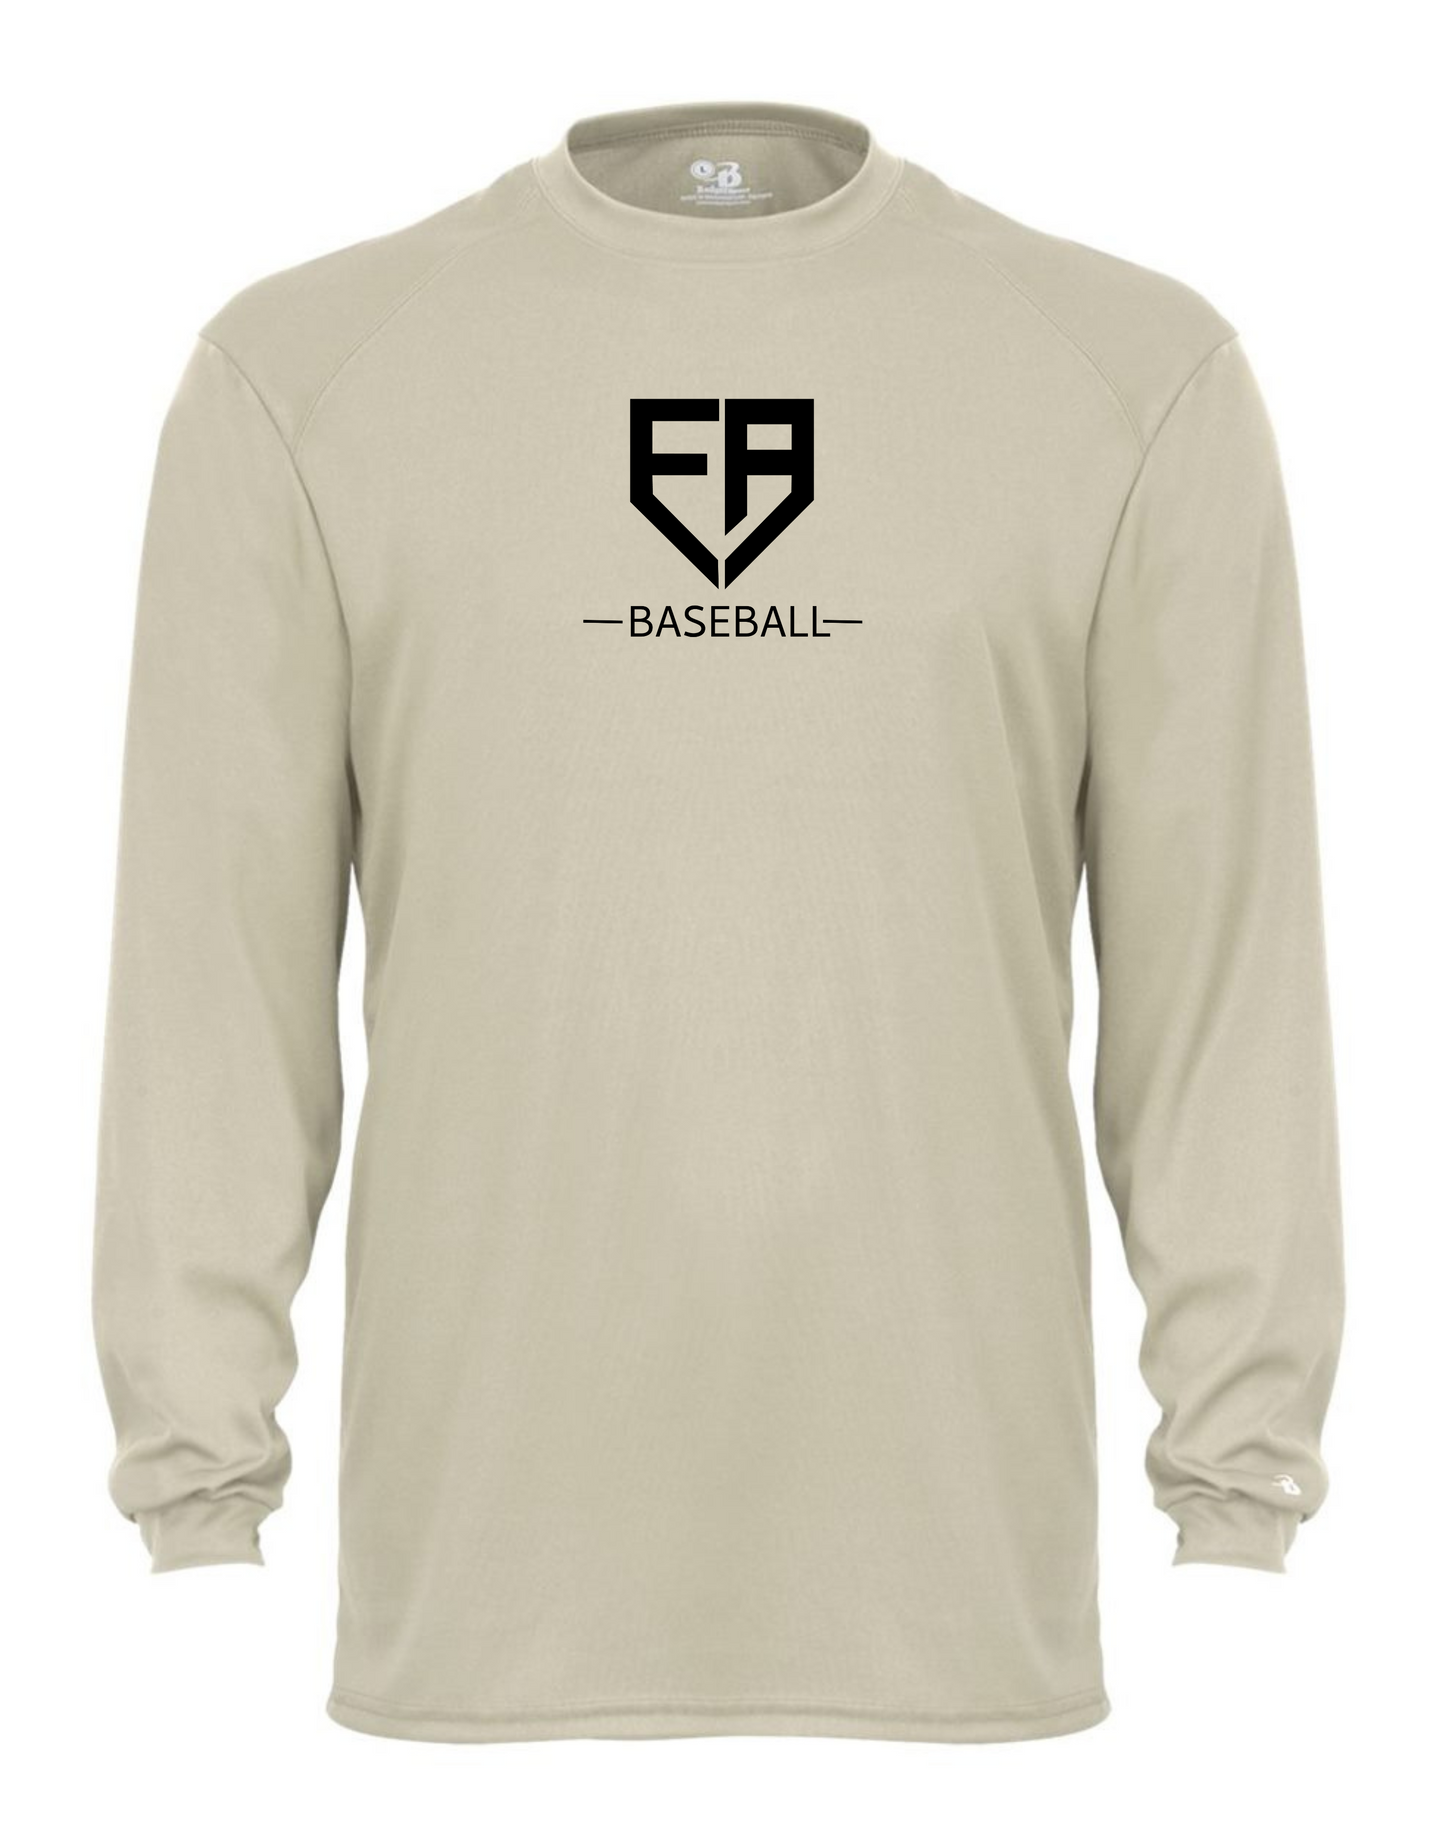 ADULT Dri-Fit SAND - Front Design Only